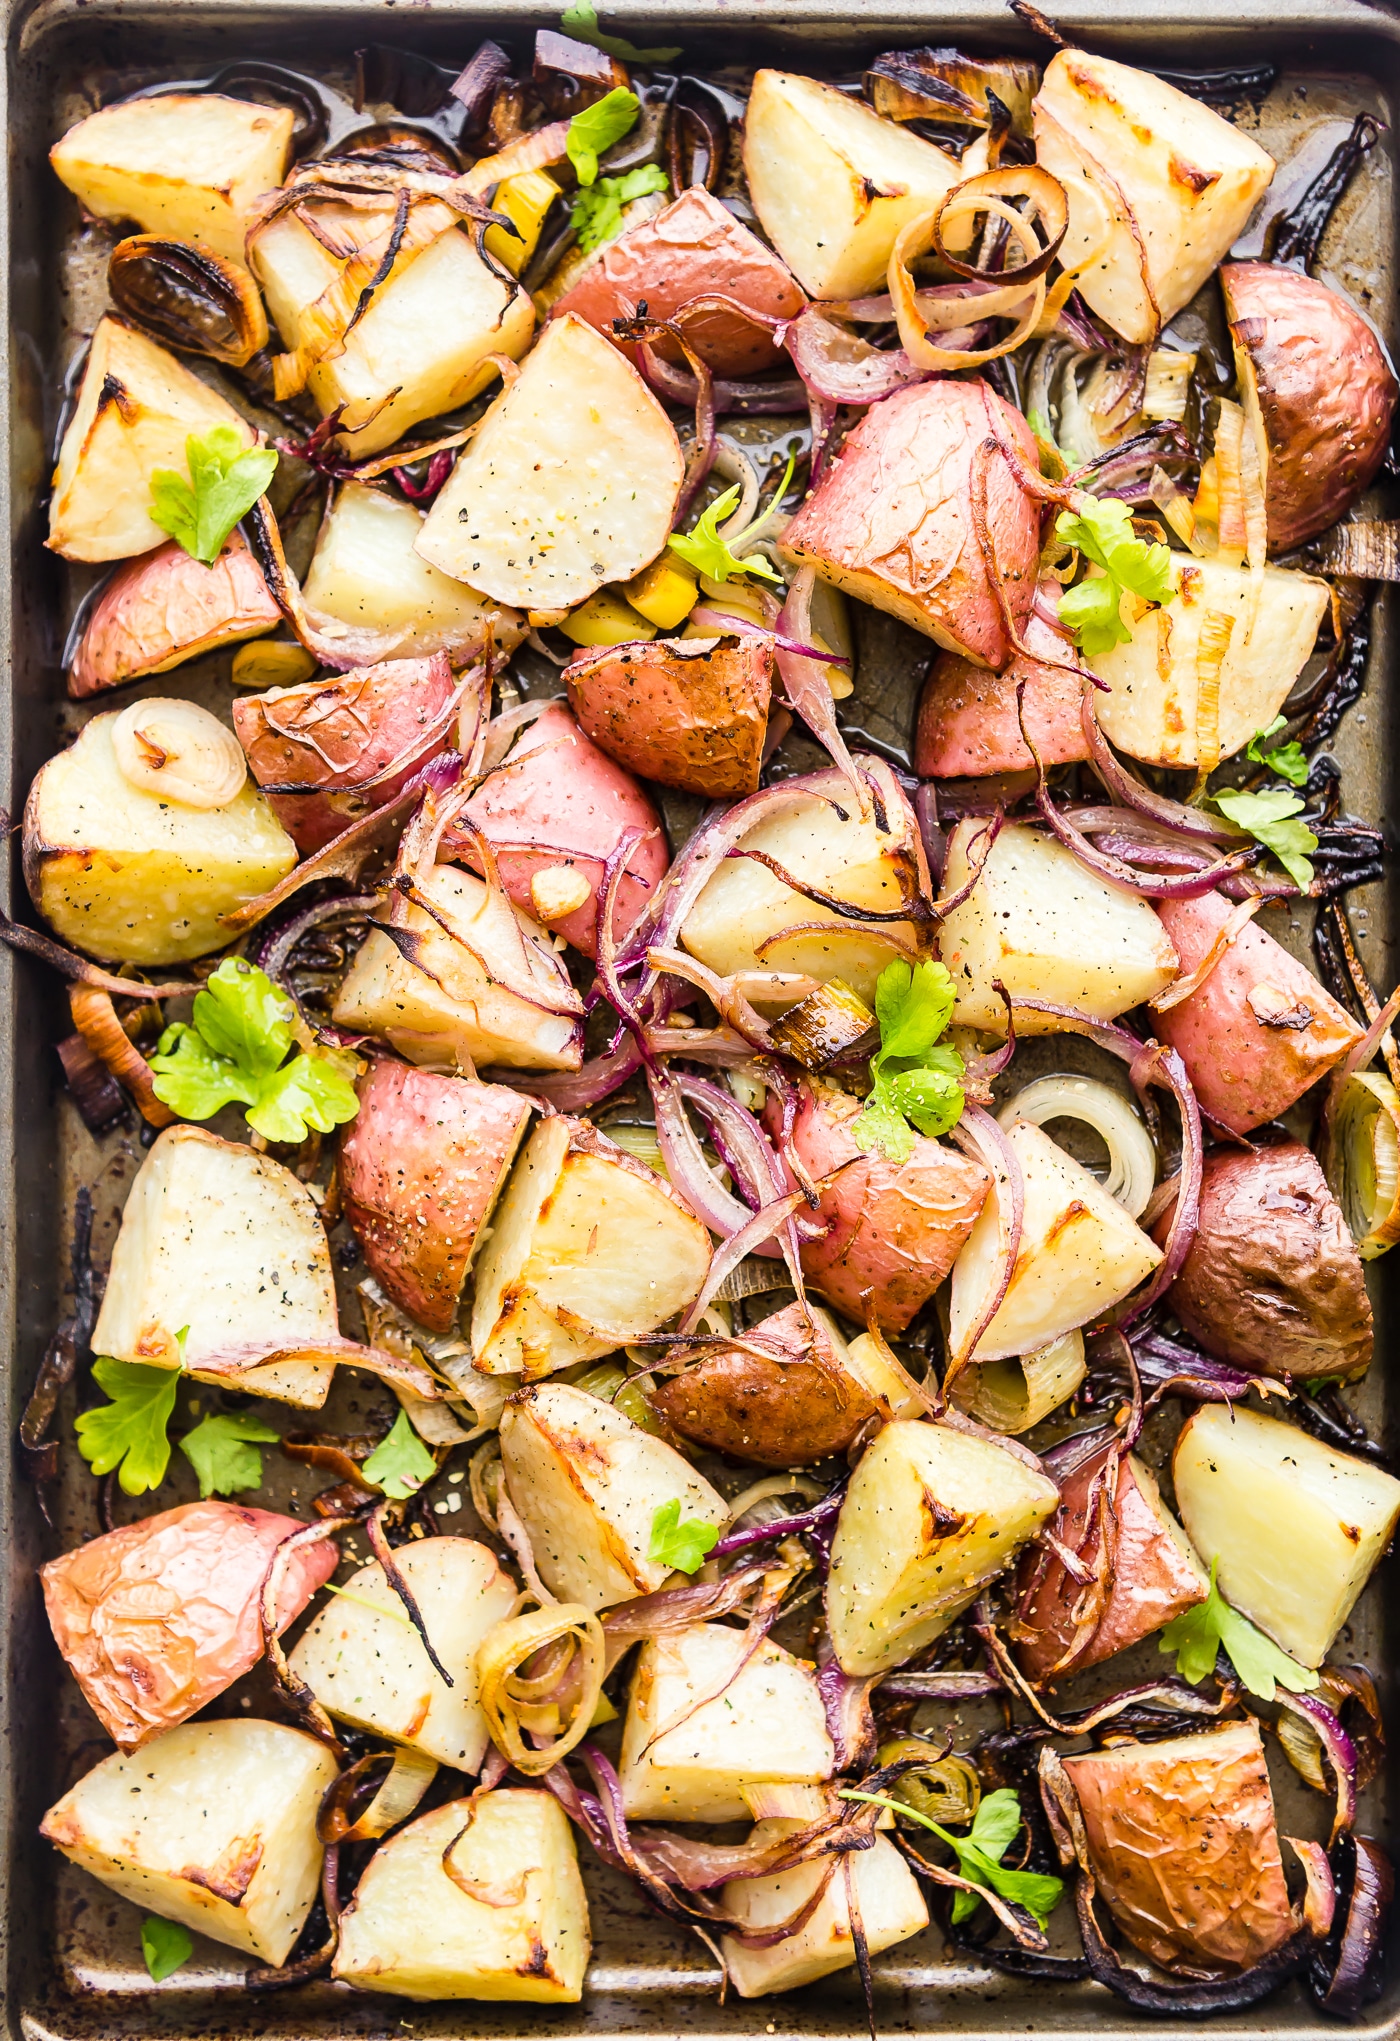 Leek and Oven Roasted Potato! This Vegetable Pan Roast is packed with Seasonal Leek, Potato, and Steamed Spinach Greens! A flavorful, healthy, and easy to make side dish you can make all in one pan! A paleo/vegan Spring recipe perfect for any gathering. Whole 30 friendly!